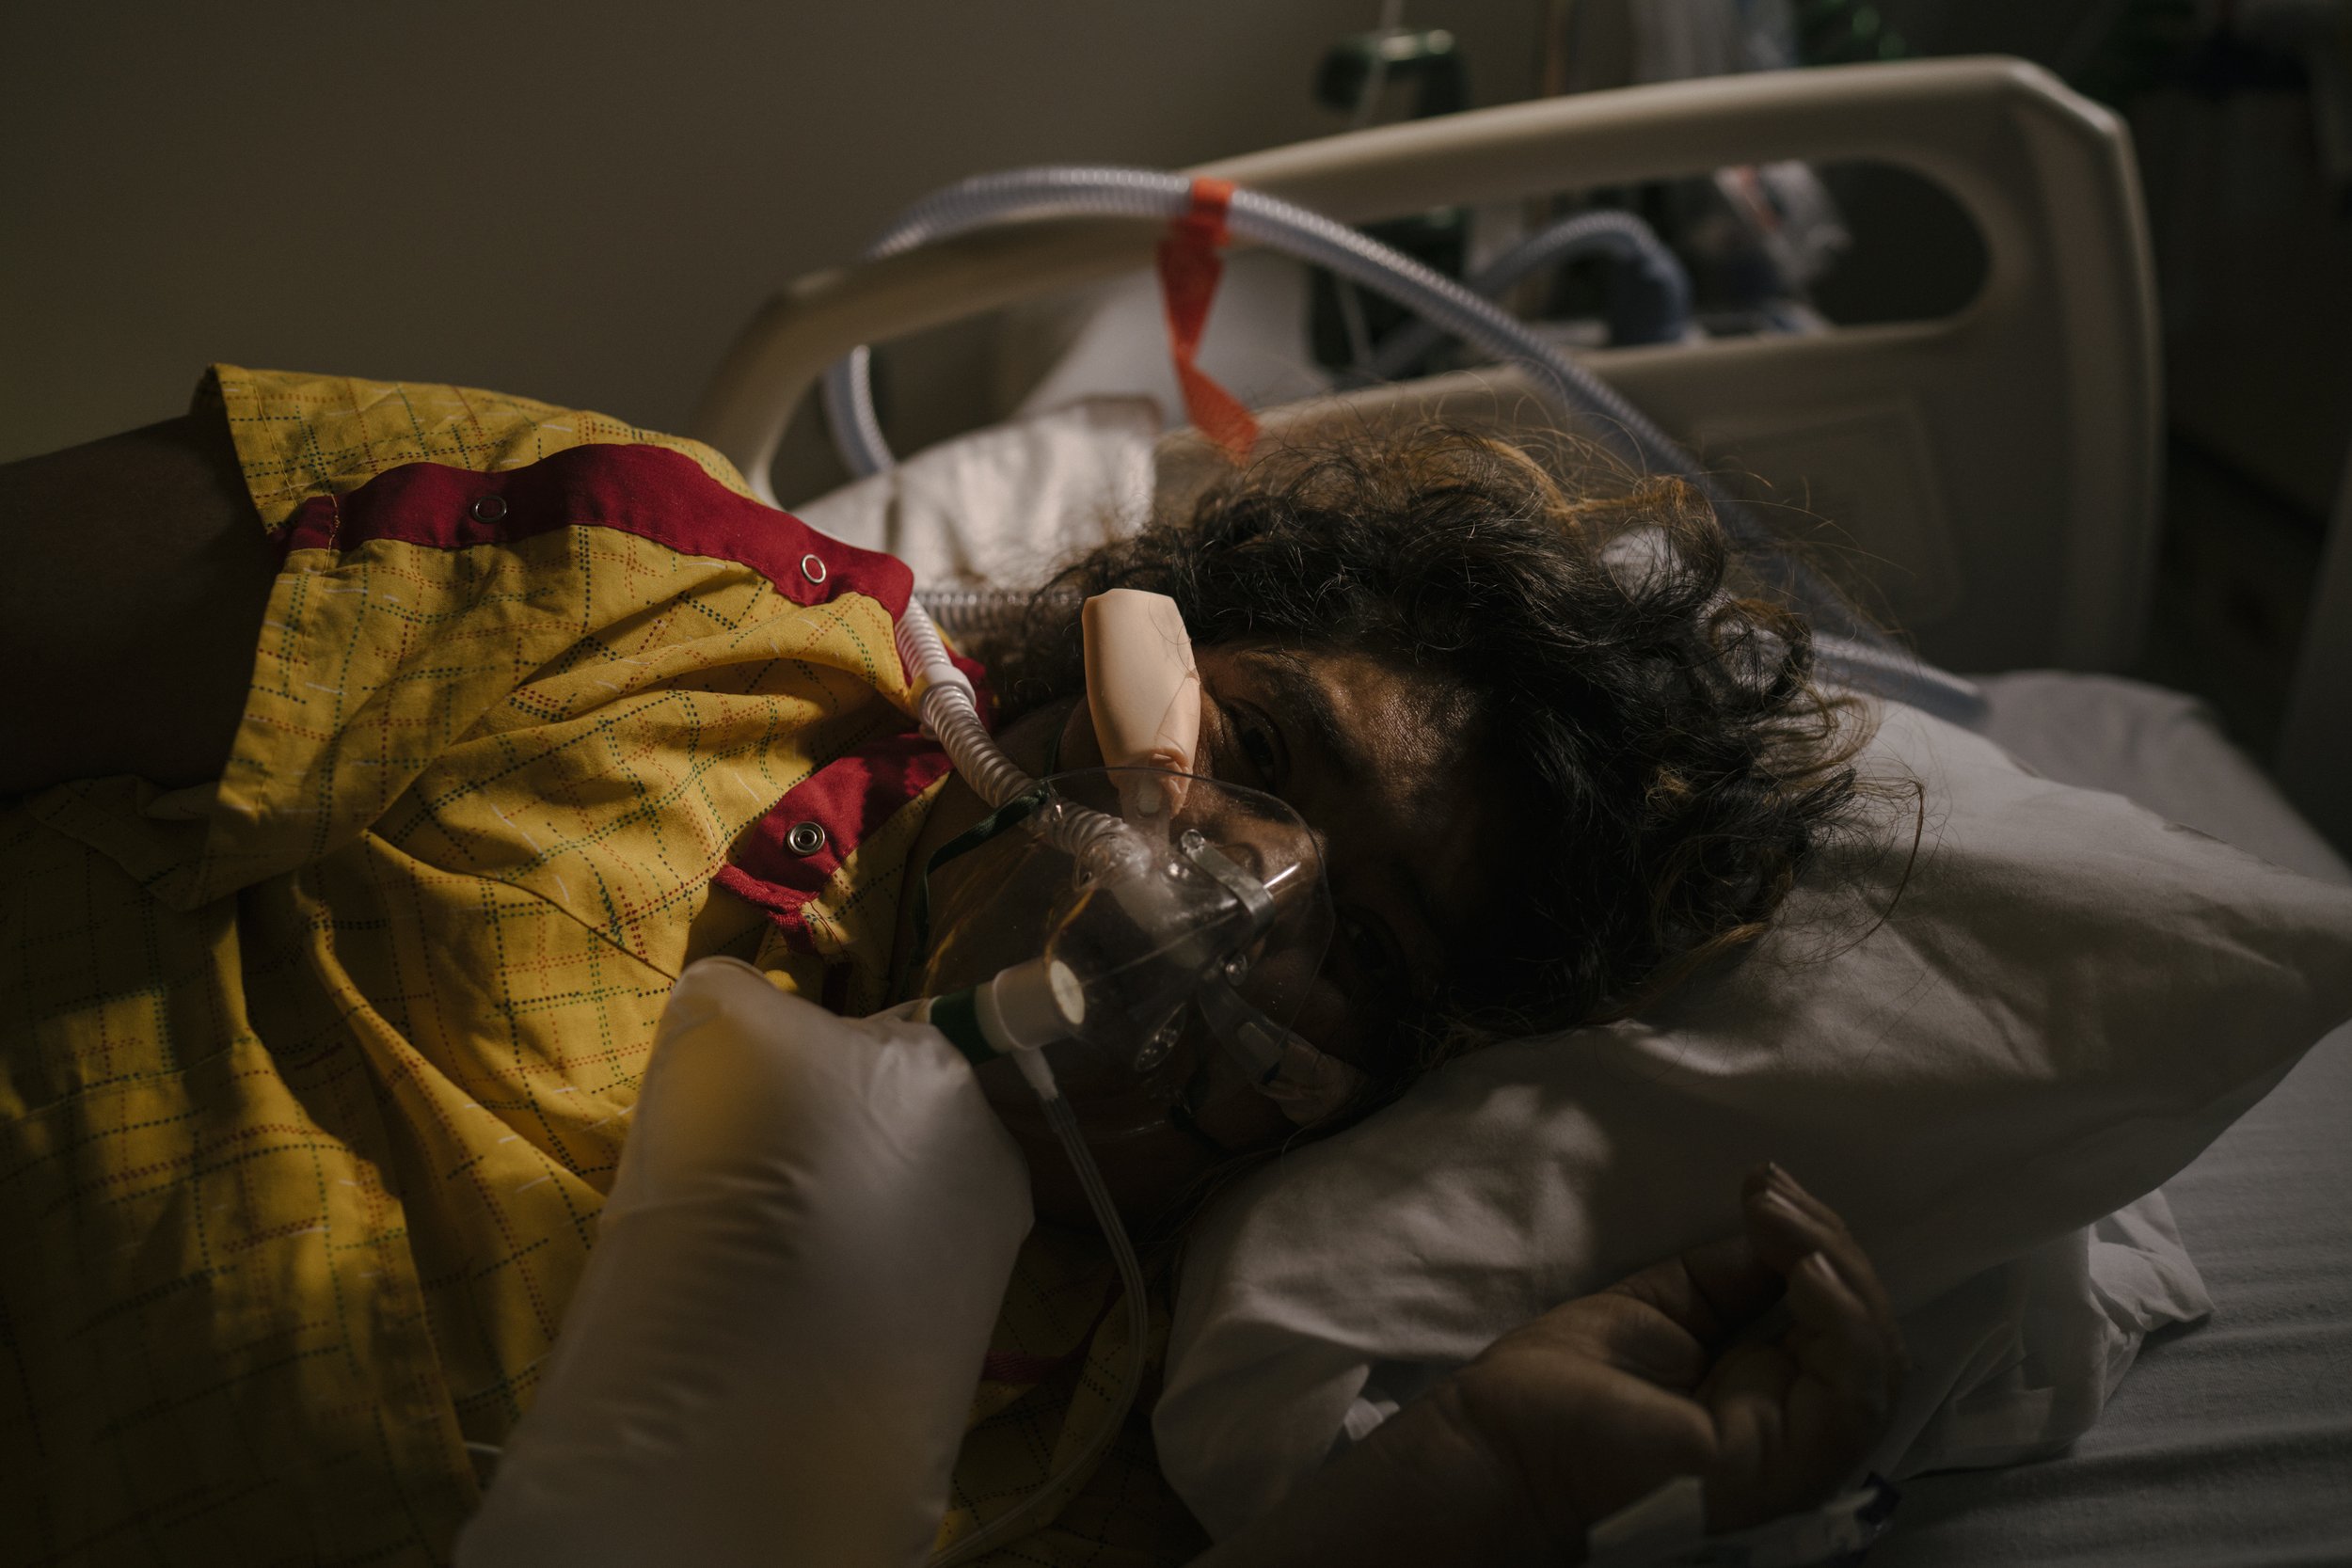  Edith Parredes lies in her bed in the telemetry section of the hospital. Ms. Parredes, 45, was hospitalized at M.L.K Jr. Community Hospital in South LA for Covid-19 for three months. She is a mother of four who has emigrated to the US from Mexico 21